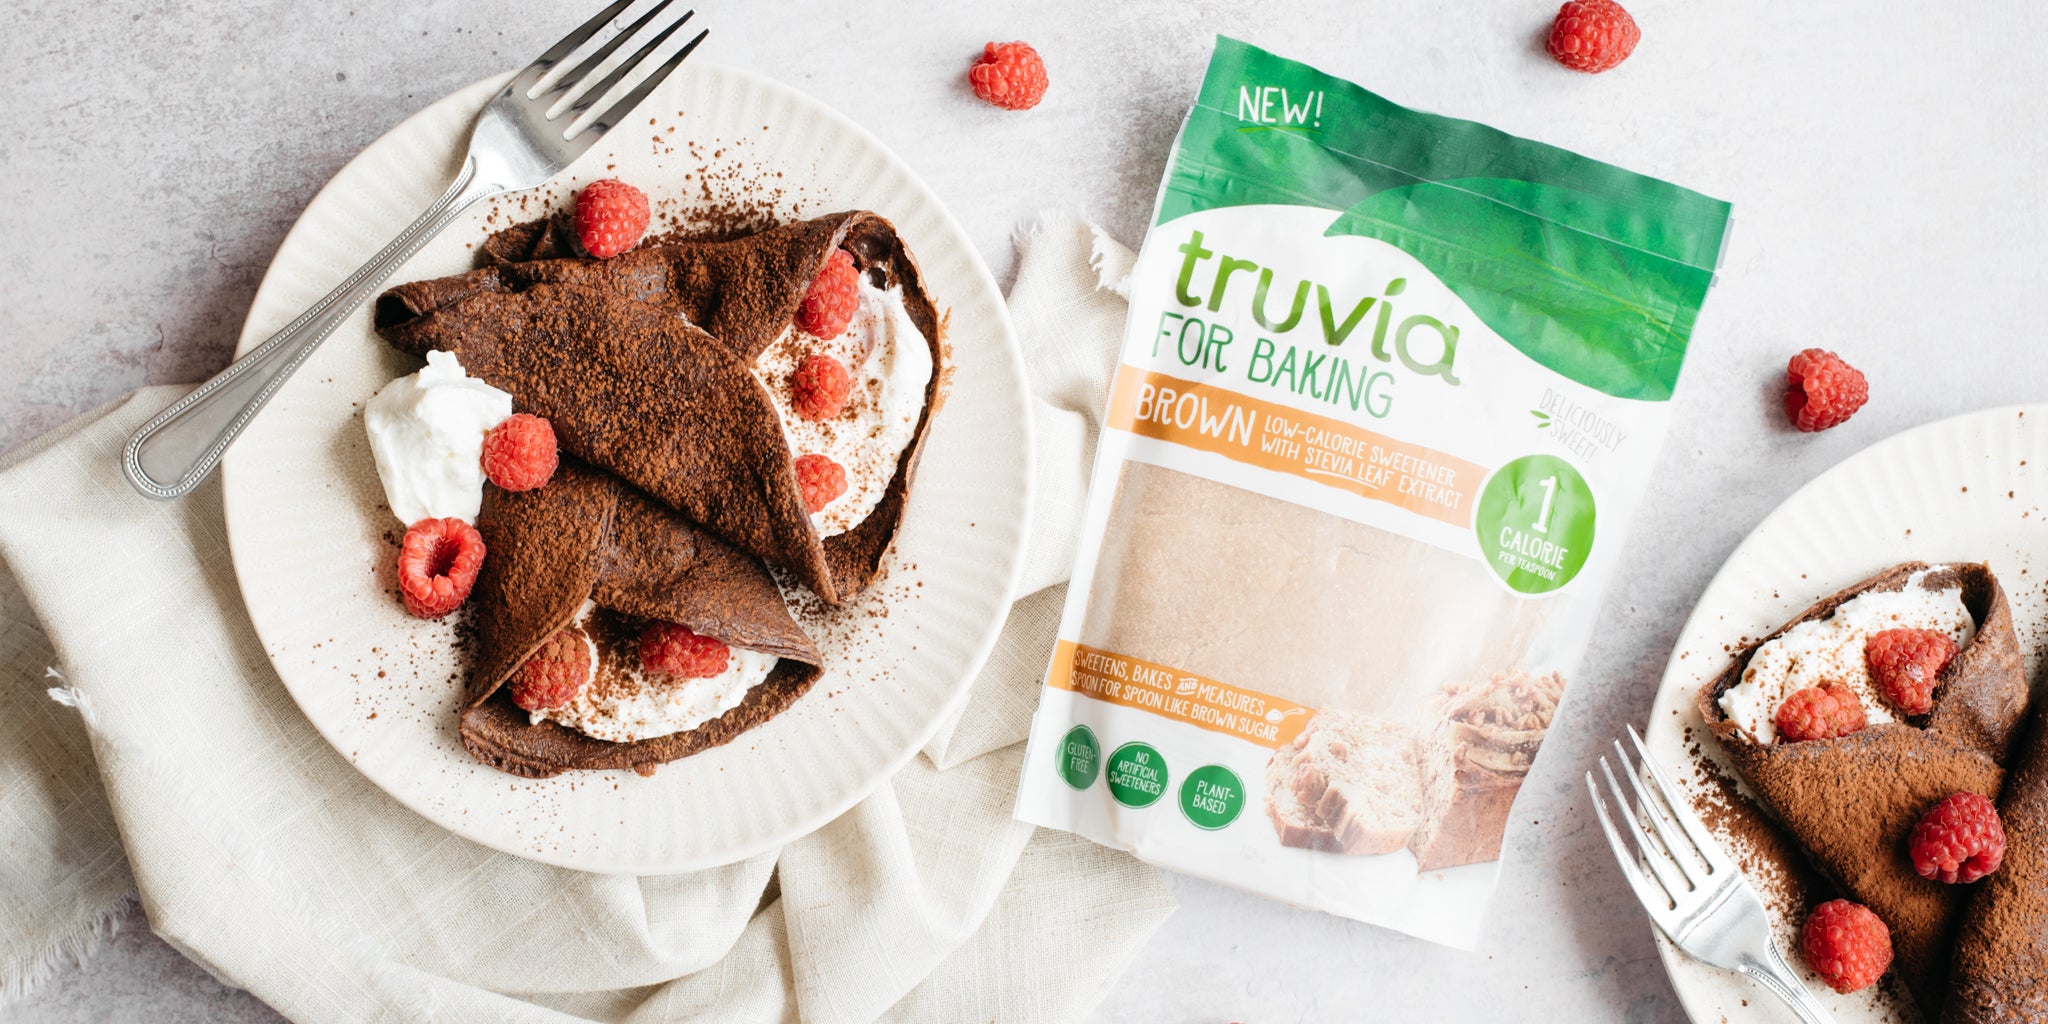 White plate with two chocolate crepes filled with cream and raspberries. Beside the plate is a pack of Truvia brown sweetener